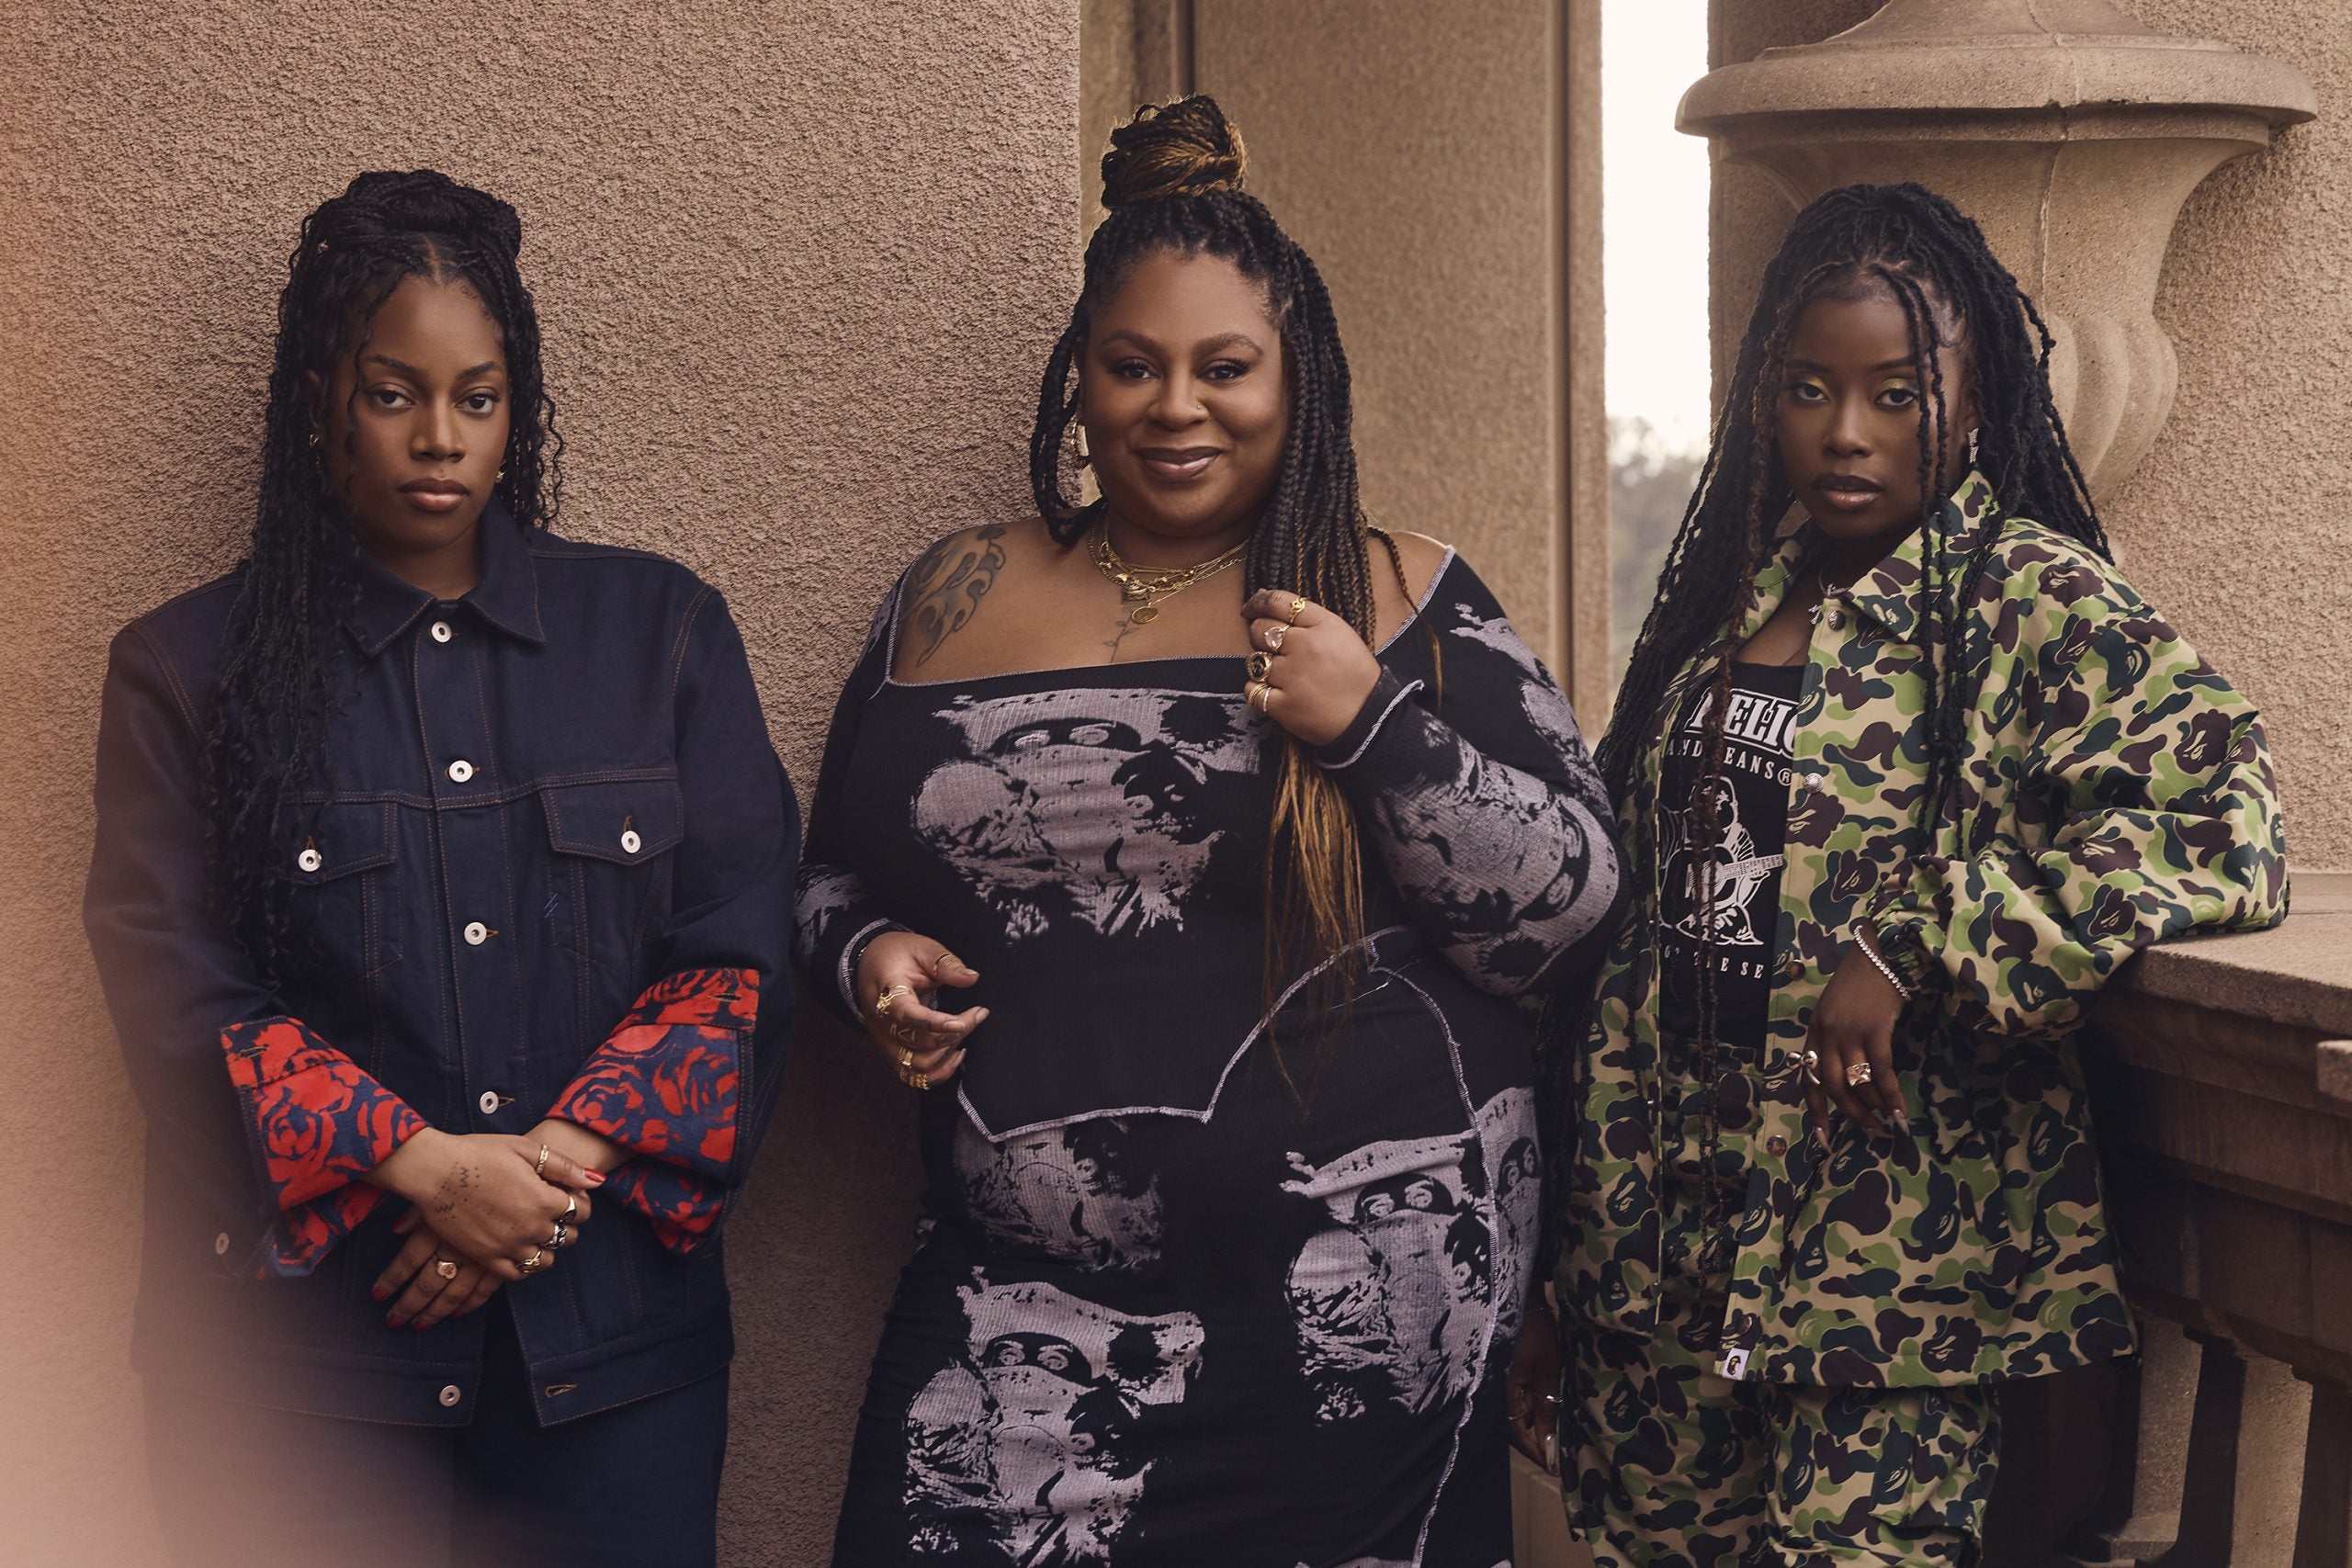 WATCH: Dionne Brown, Candice Carty-Williams, and Bellah Talk Bringing Imperfect Black Characters To The Screen With 'Queenie'